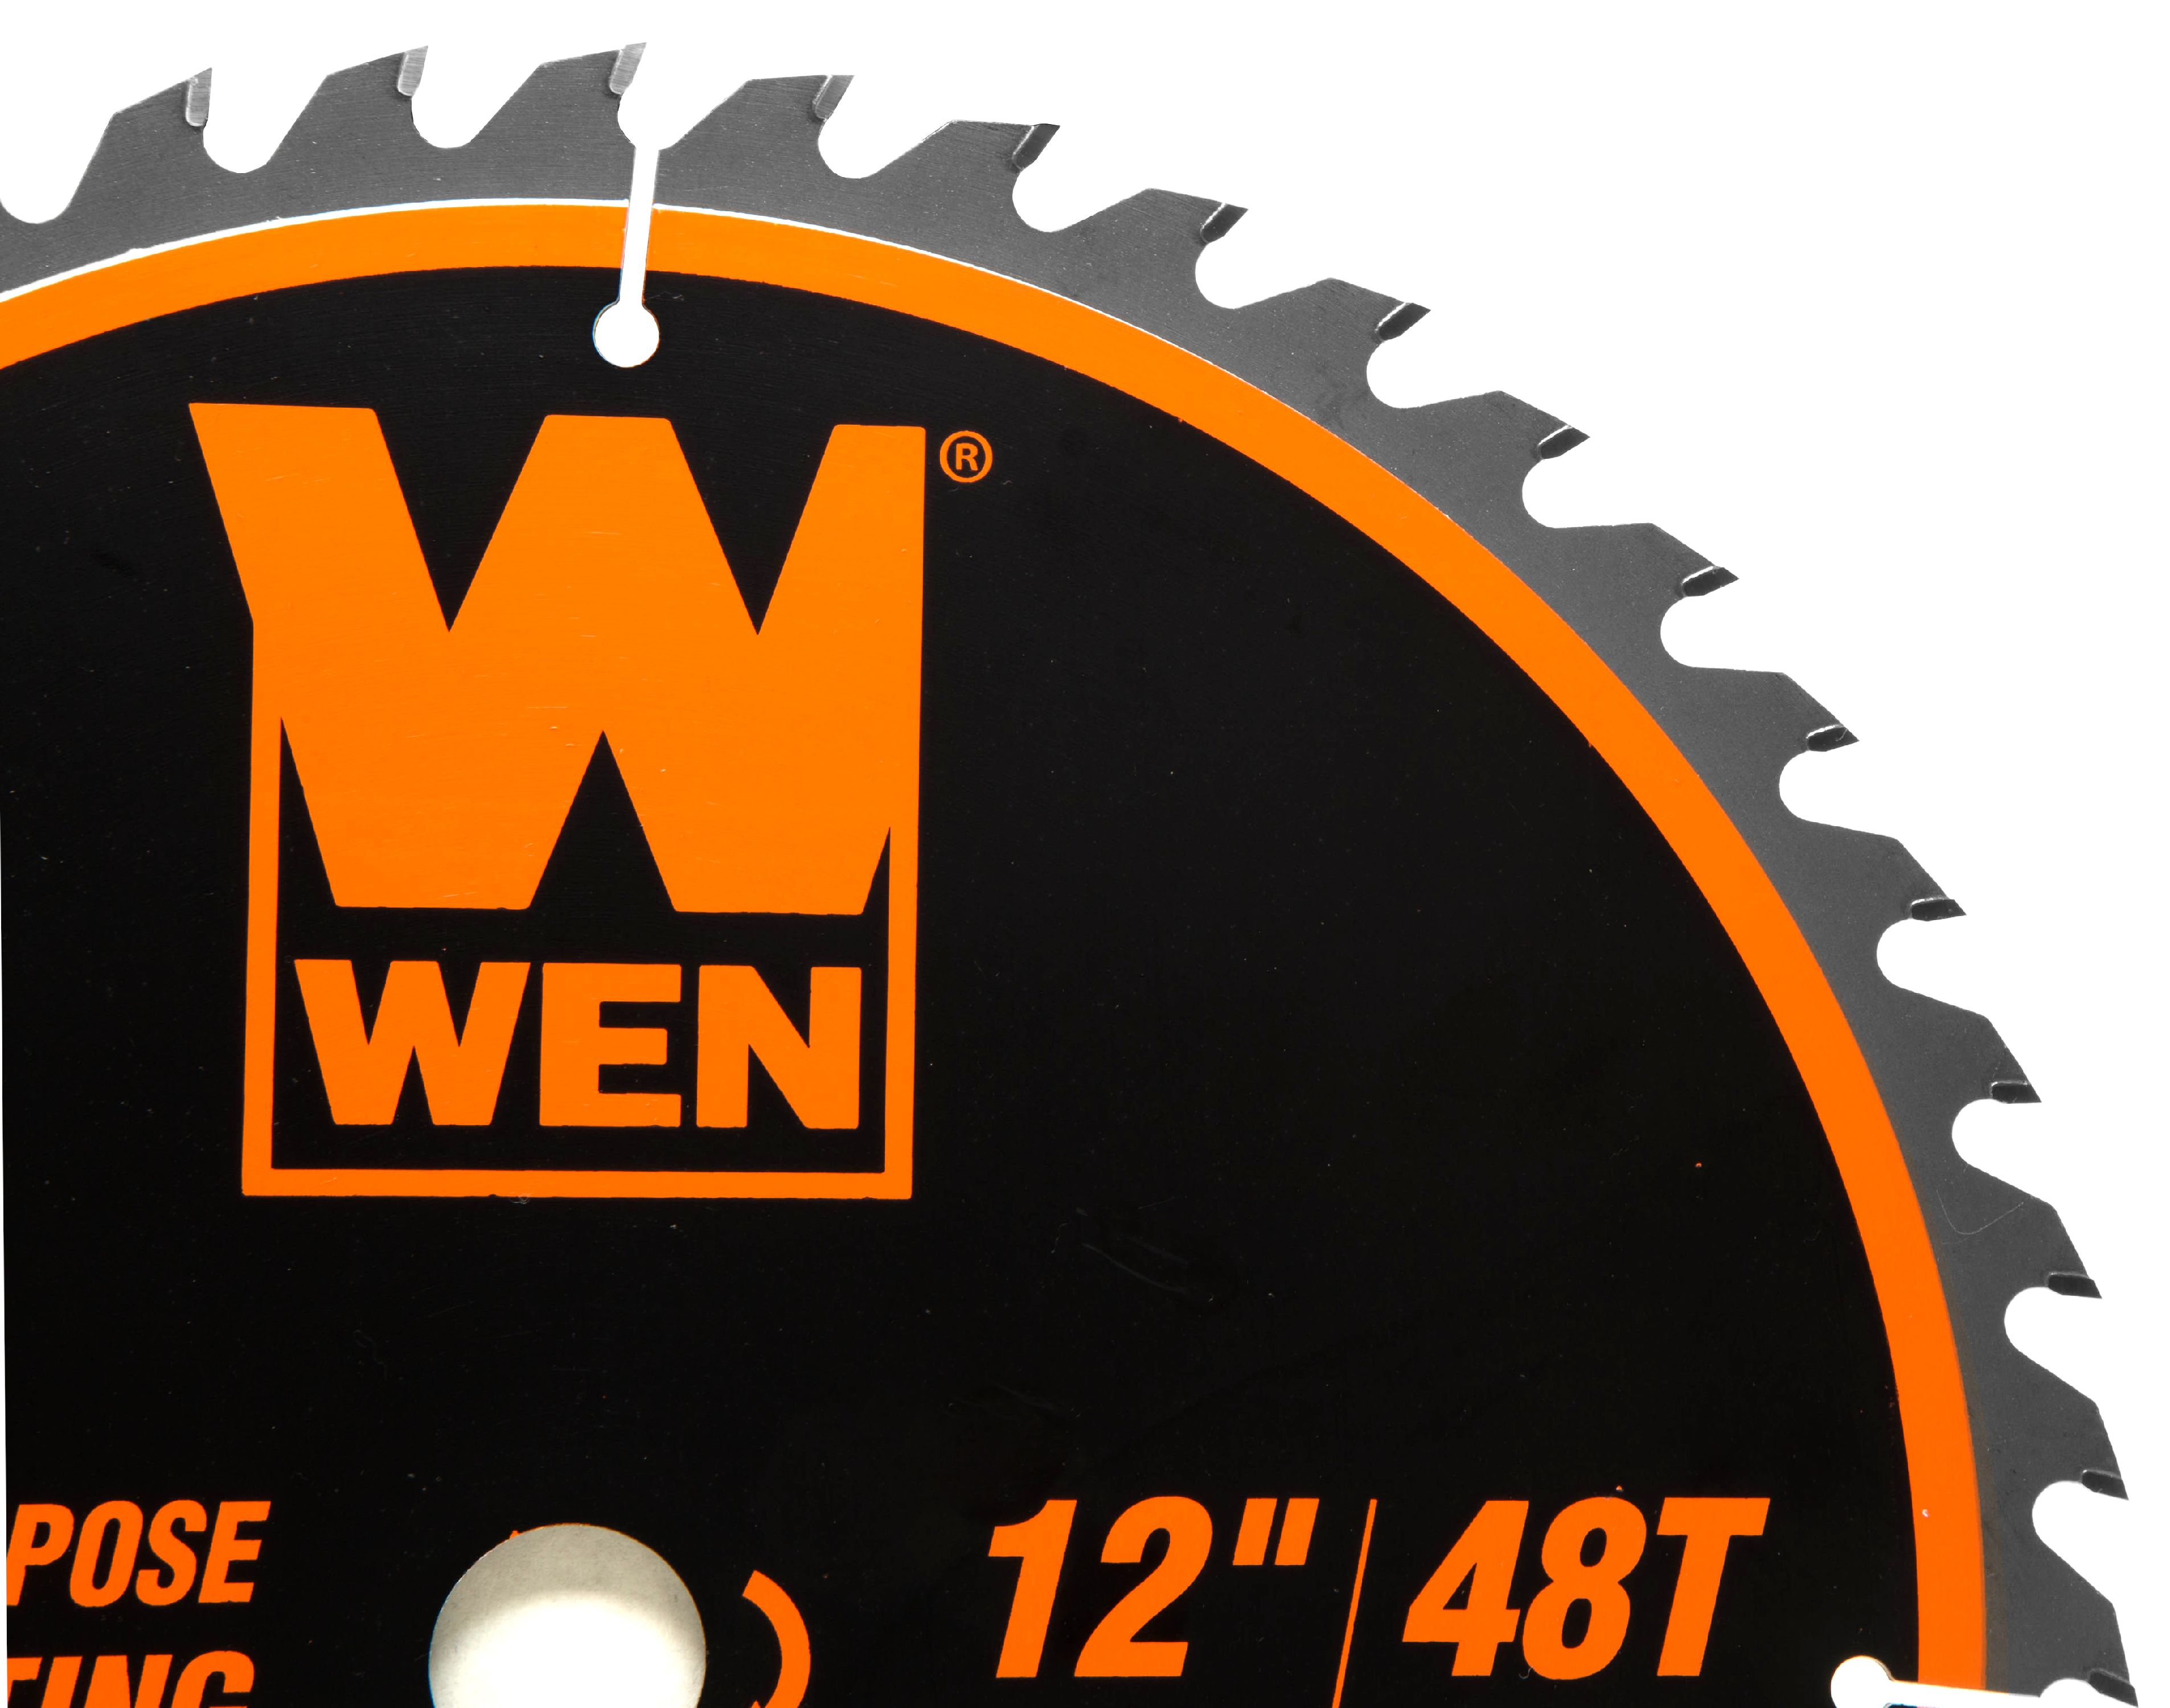 WEN 12-Inch 48-Tooth Carbide-Tipped Professional Woodworking Saw Blade for  Miter Saws and Table Saws, BL1248